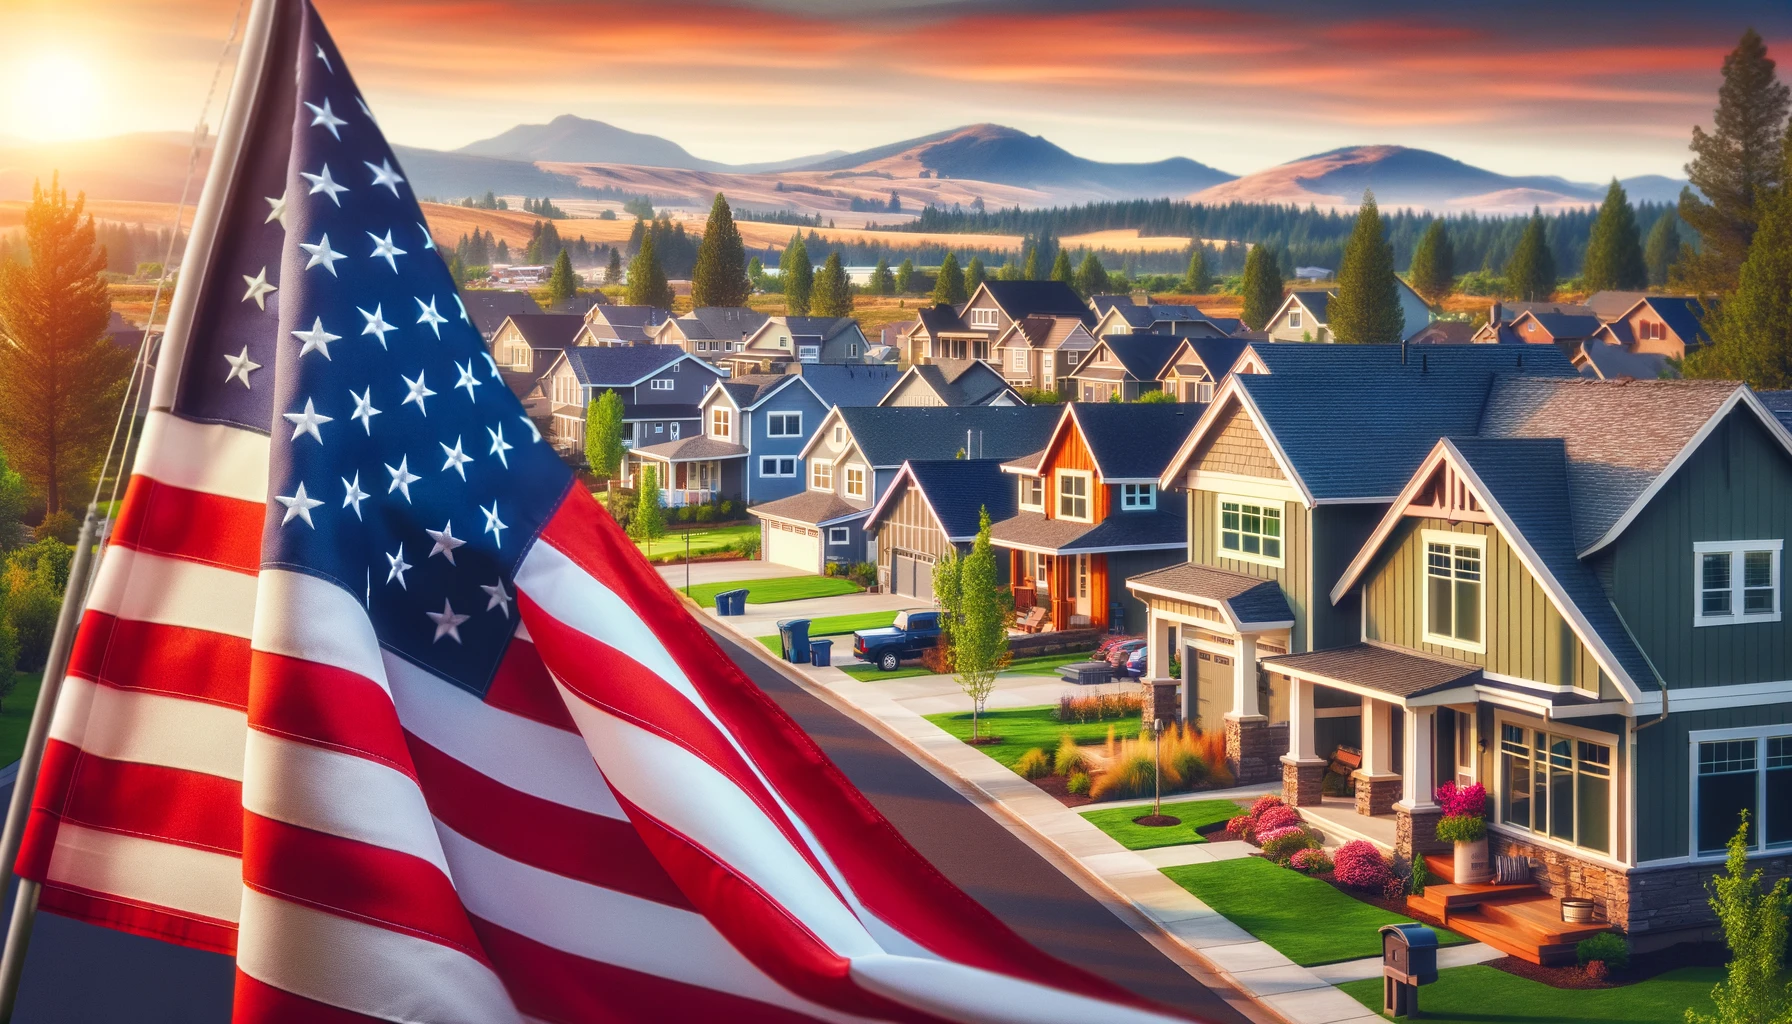 American flag and Southern Oregon neighborhood representing veterans' homeownership opportunities through VA loans on Veterans Day.